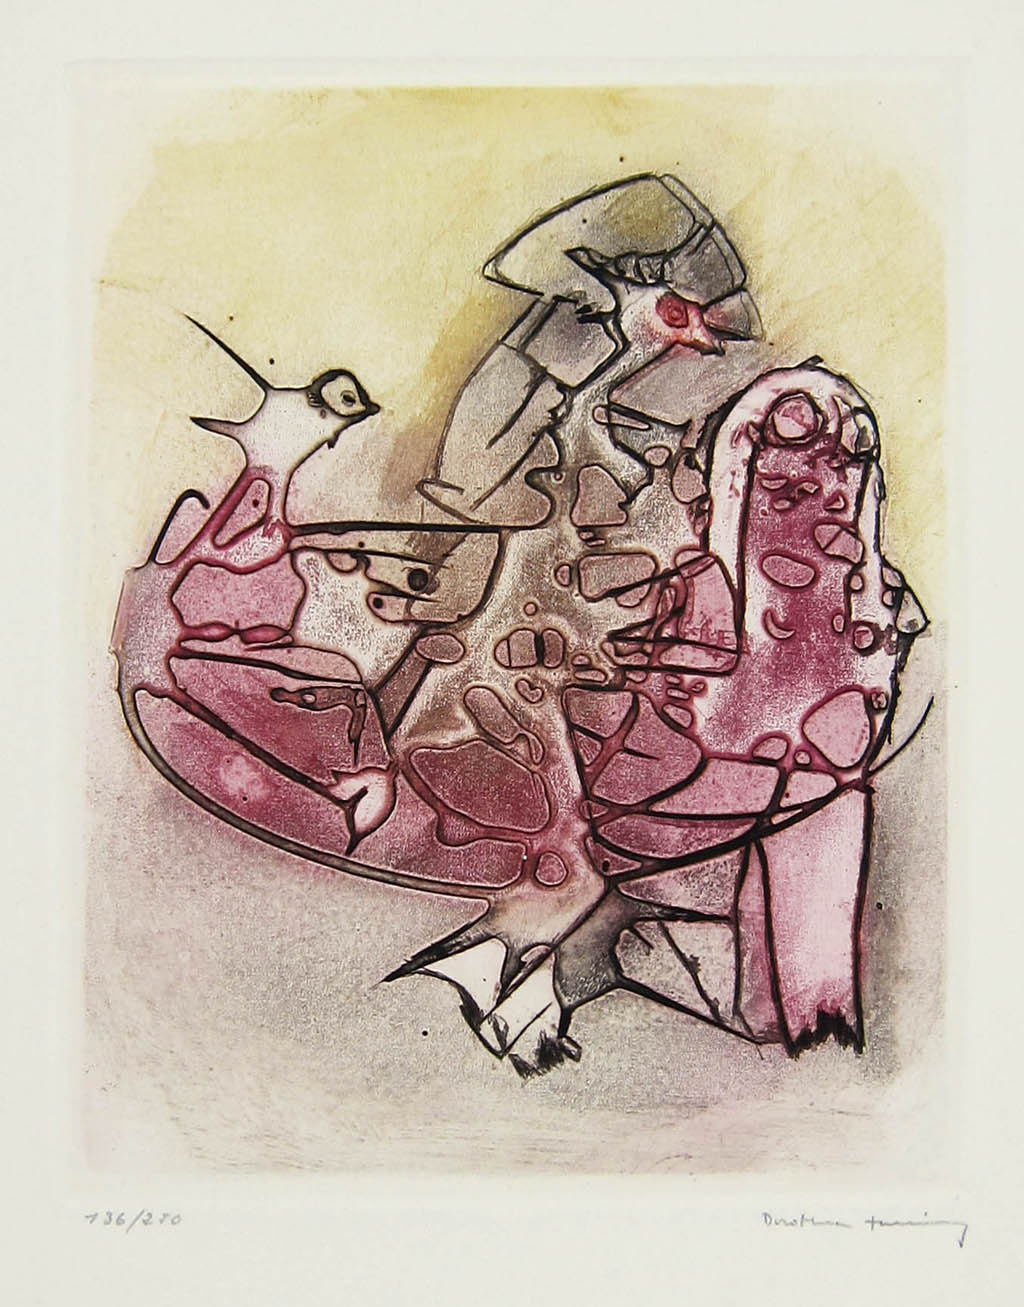 Dorothea Tanning - Orphans - 1963 color etching